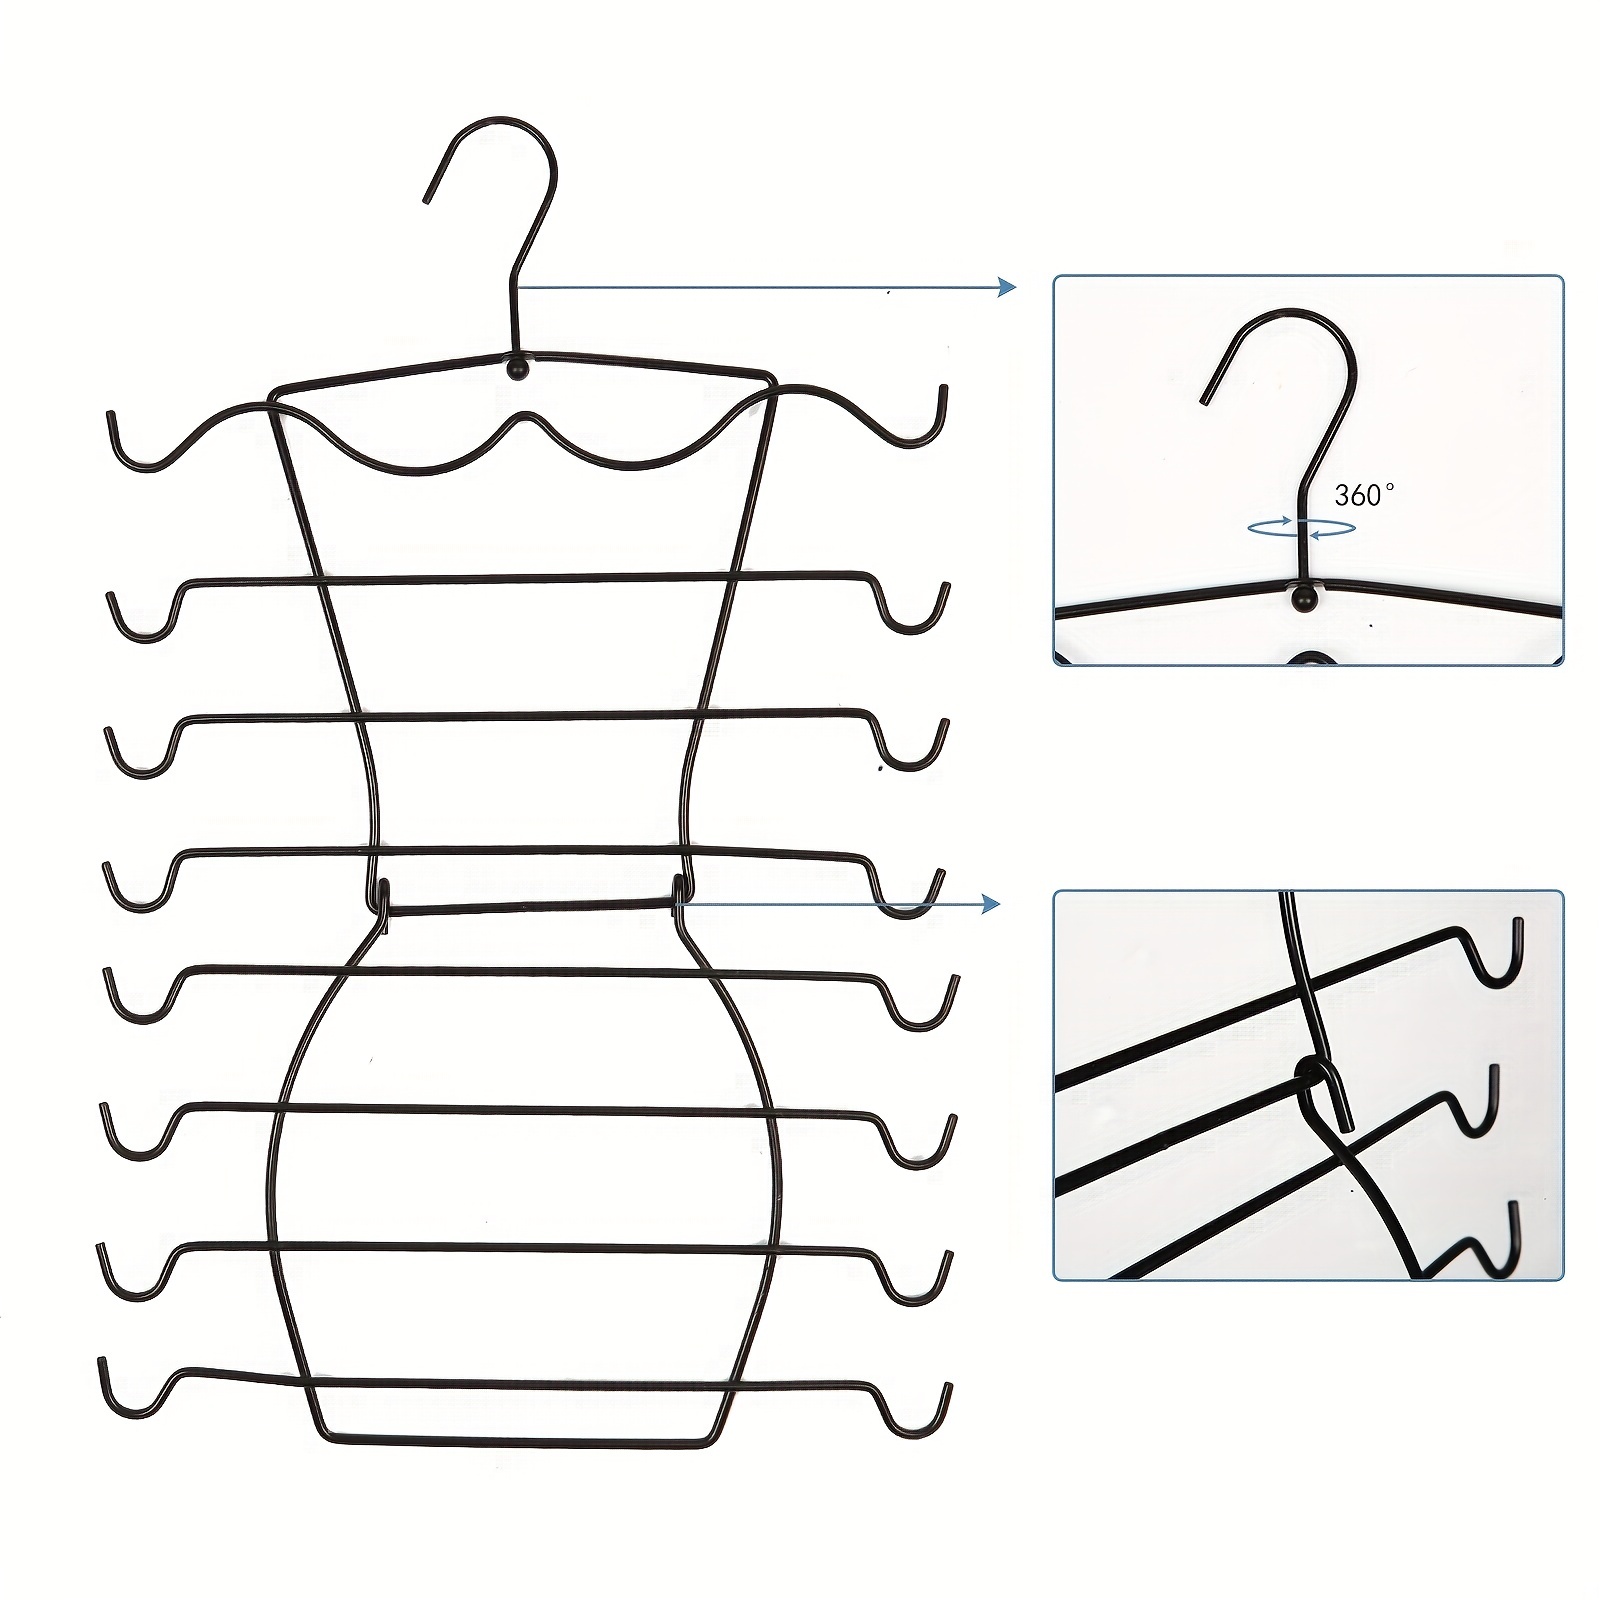  Tank Tops Hangers 2 Pack, Bra Hanger Space Saving Closet  Organizers and Storage for Organizer for Bras, Tops, Camisoles, Scarfs or  Belts : Home & Kitchen